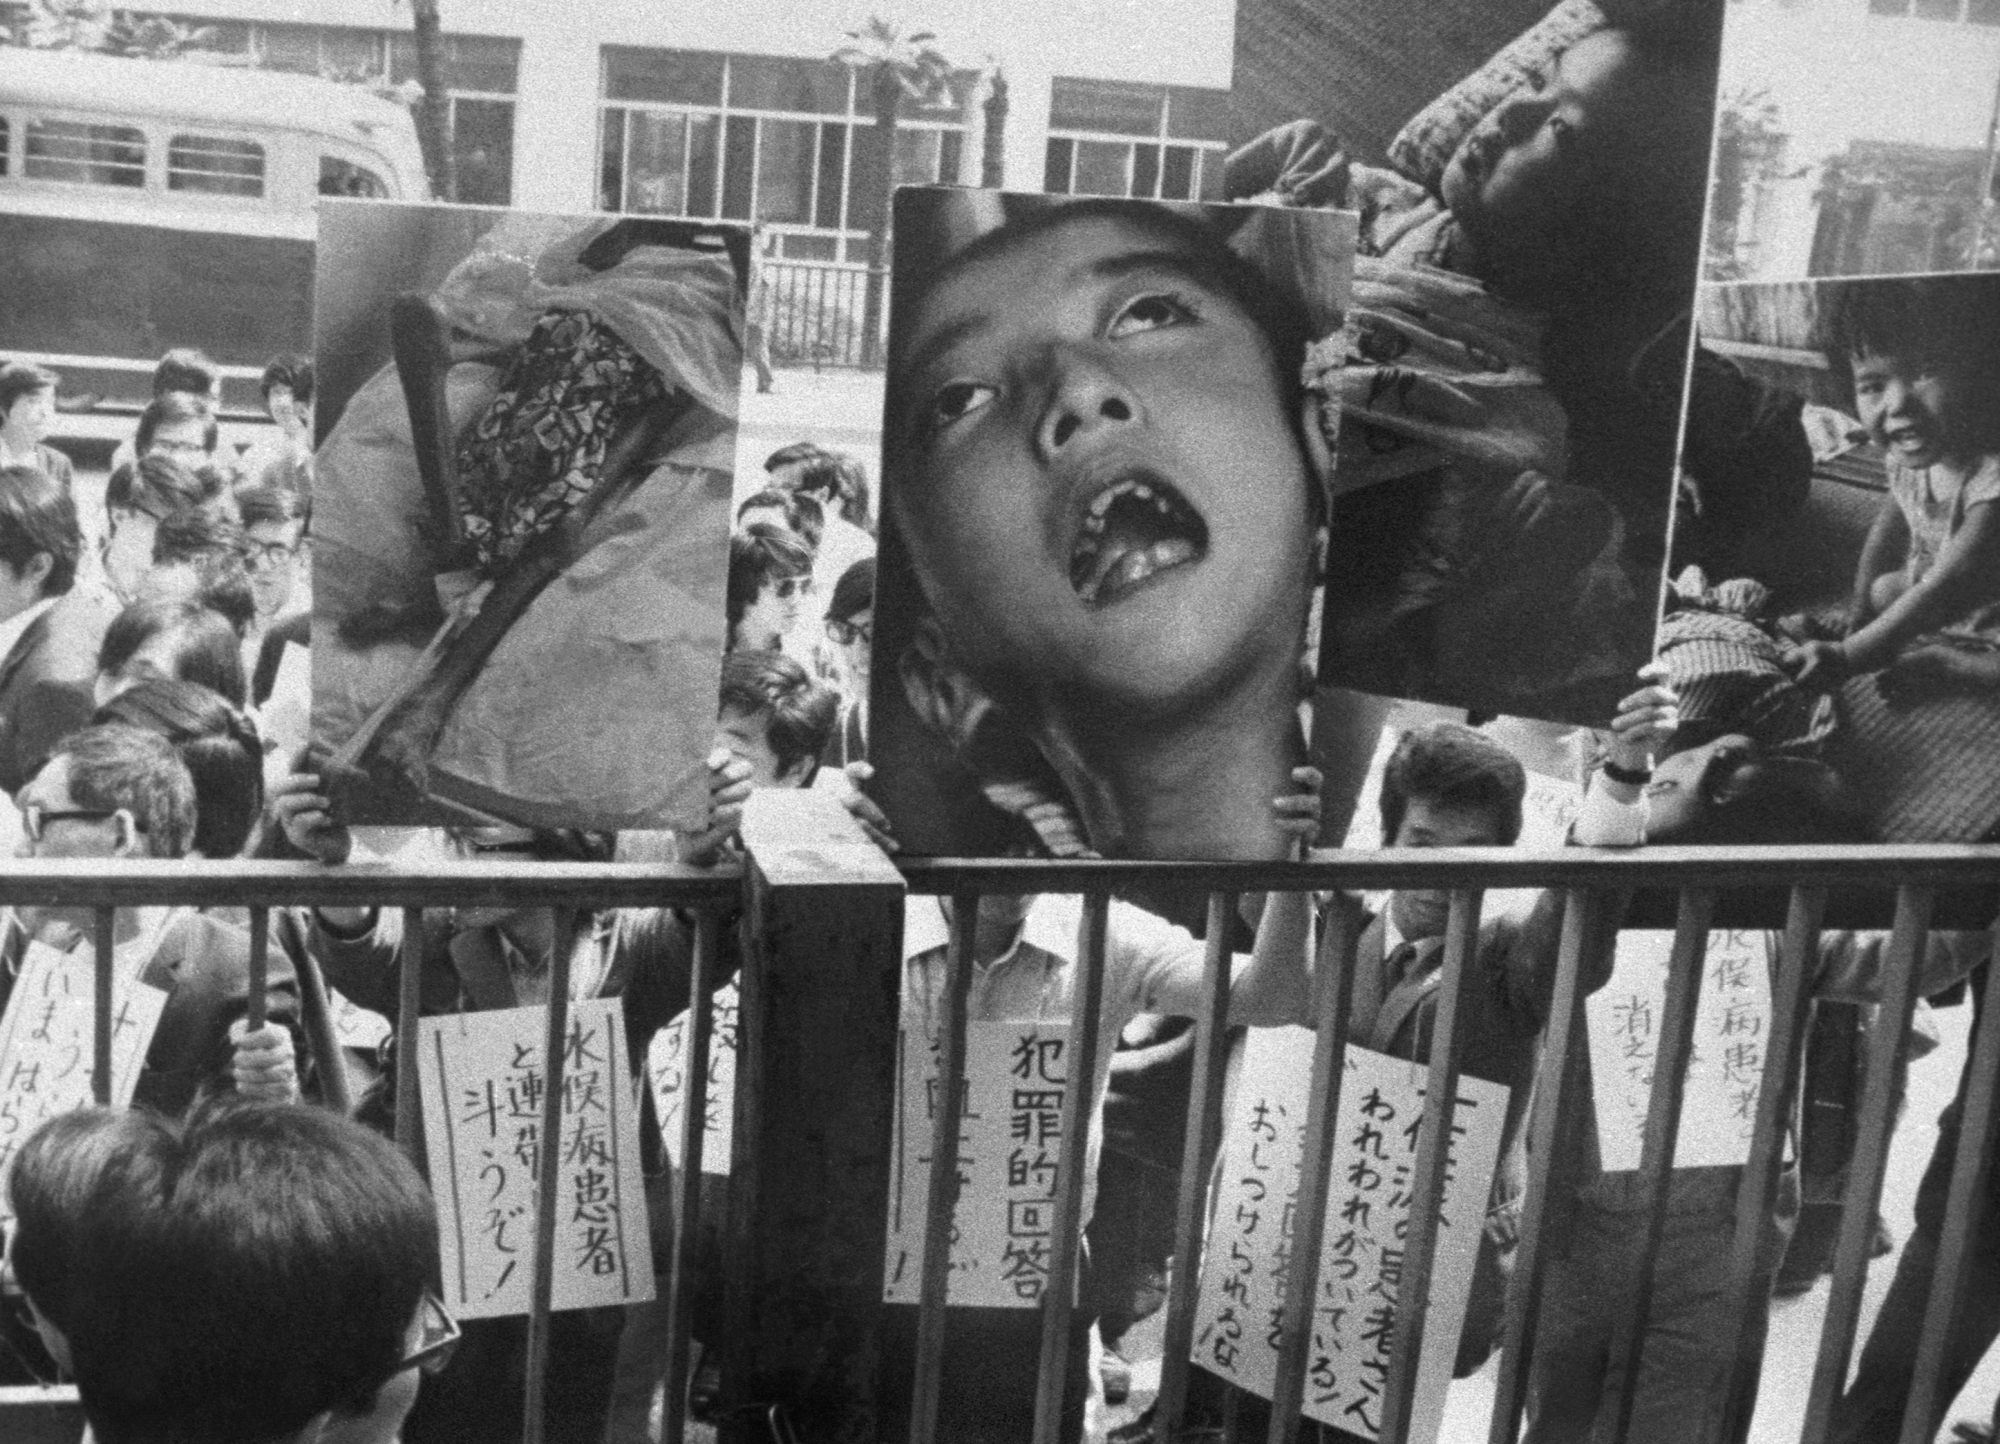 Niigata Minamata disease victims protest in front of the health ministry building in Tokyo in May 1970. | KYODO